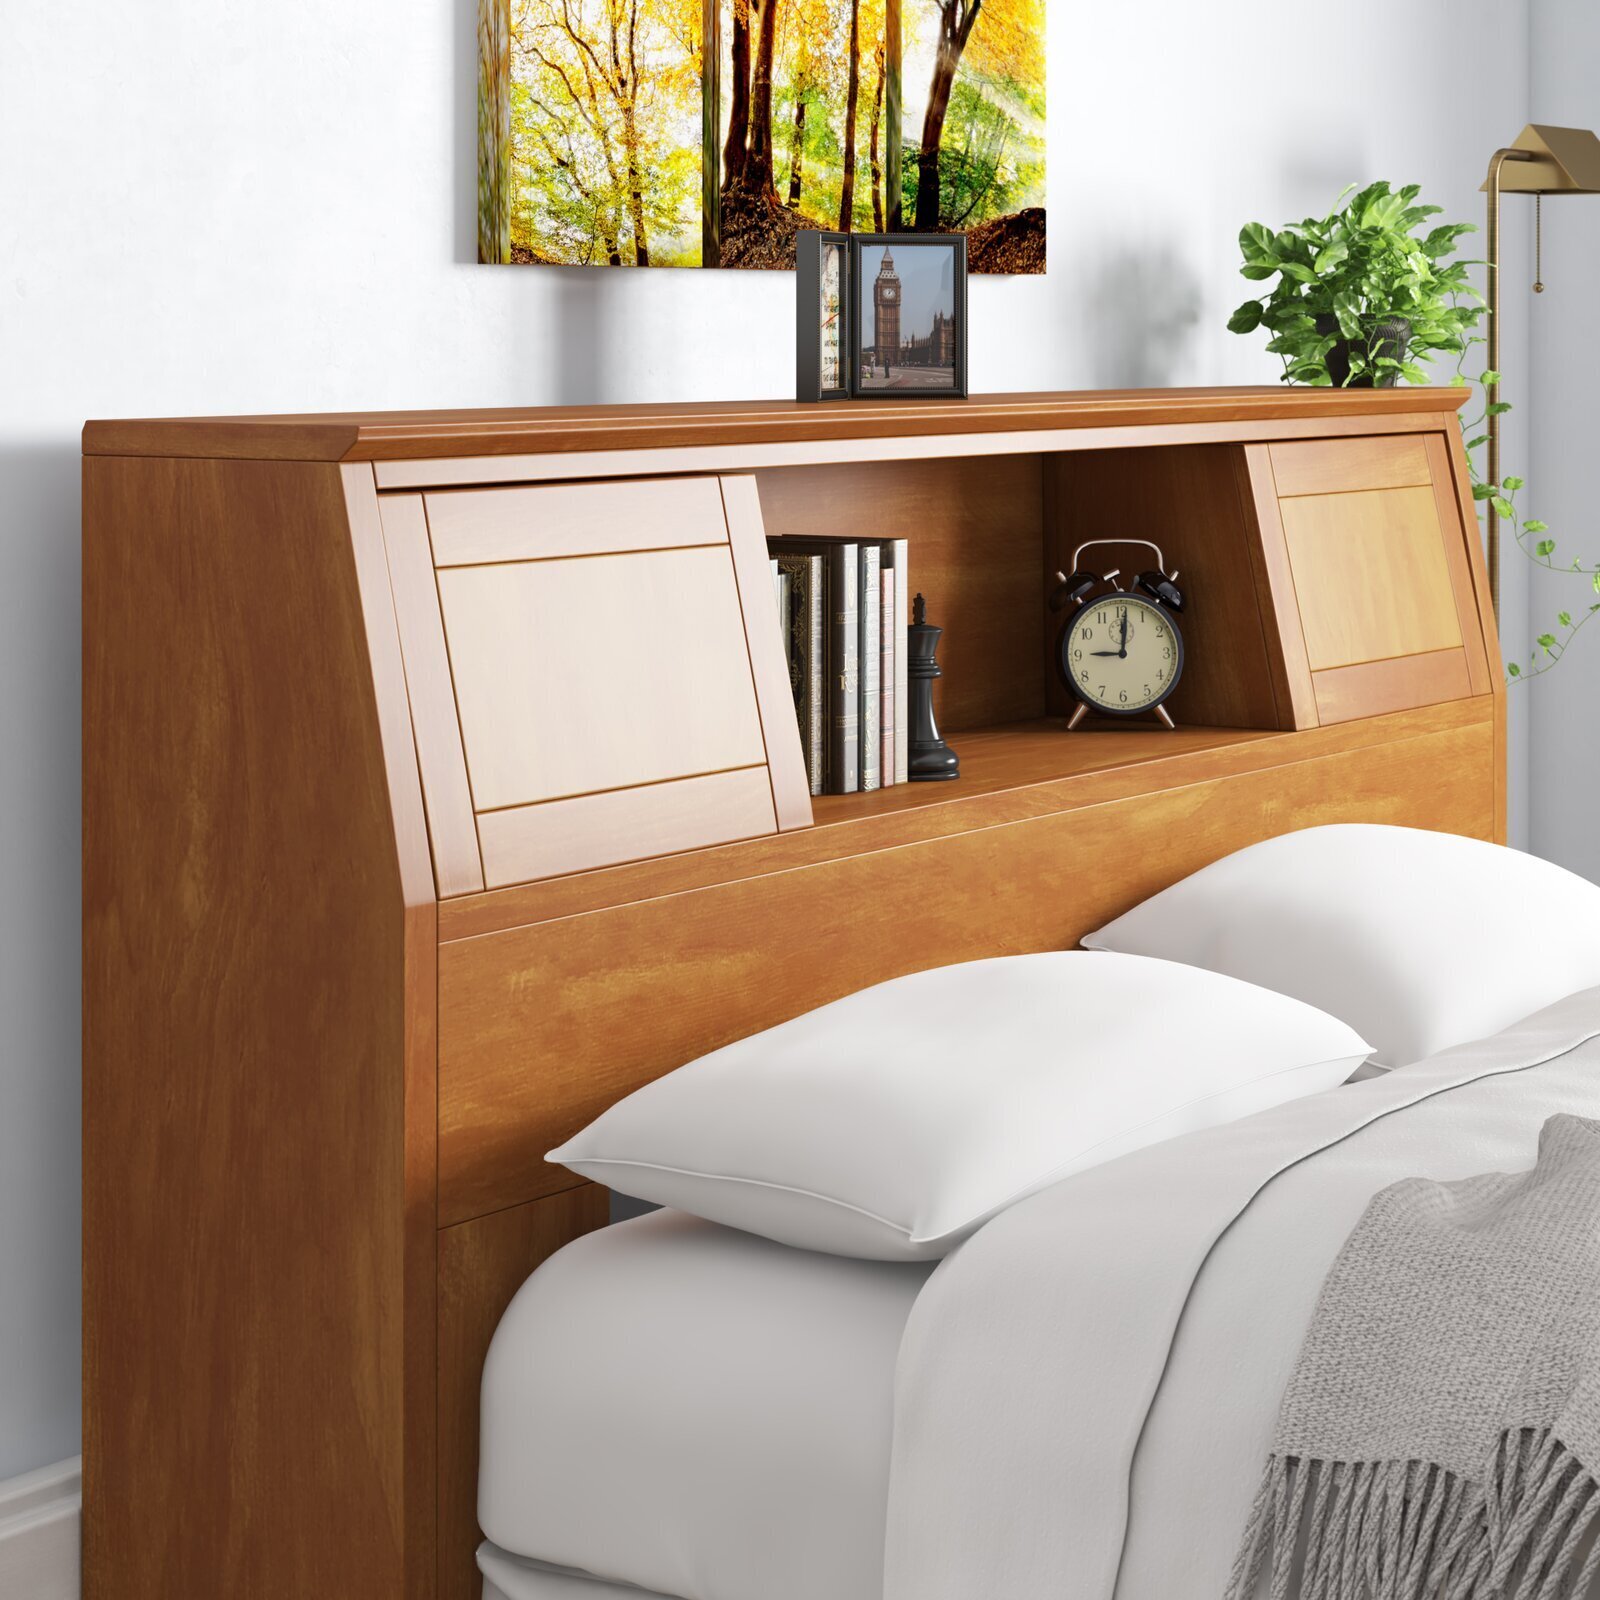 Wooden hidden storage headboard with traditional flair